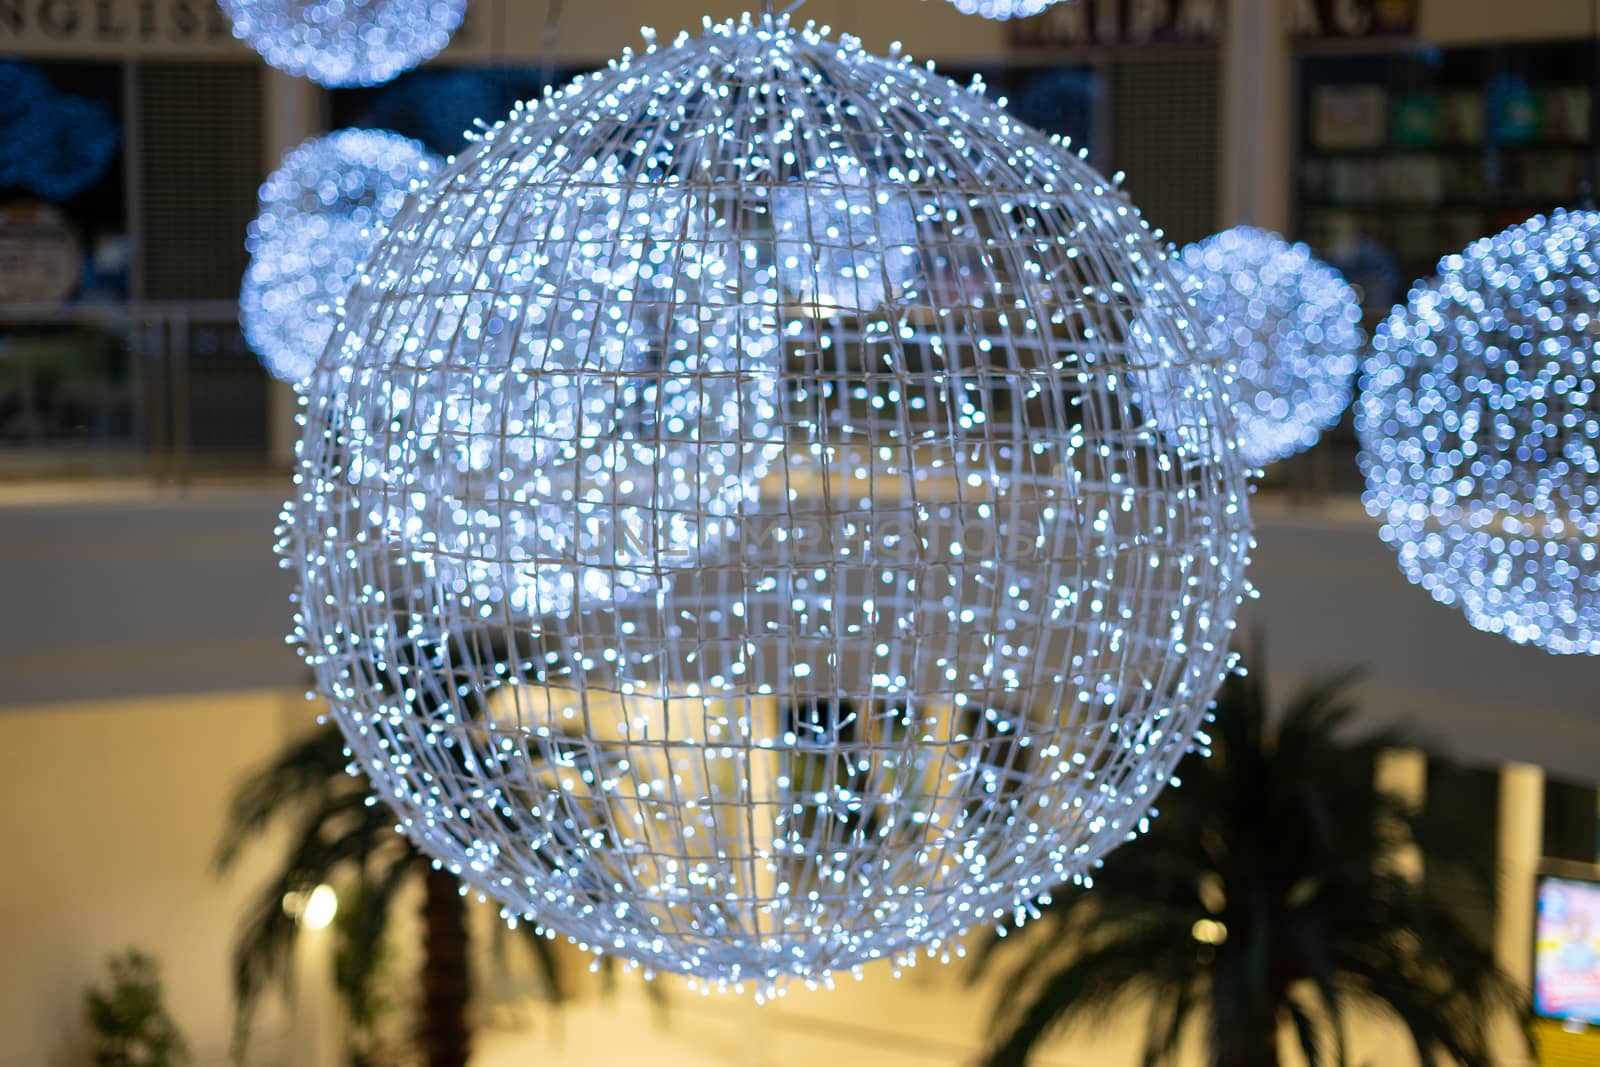 big bright balls with garlands. balls with white lights. decorations in the mall by Serhii_Voroshchuk